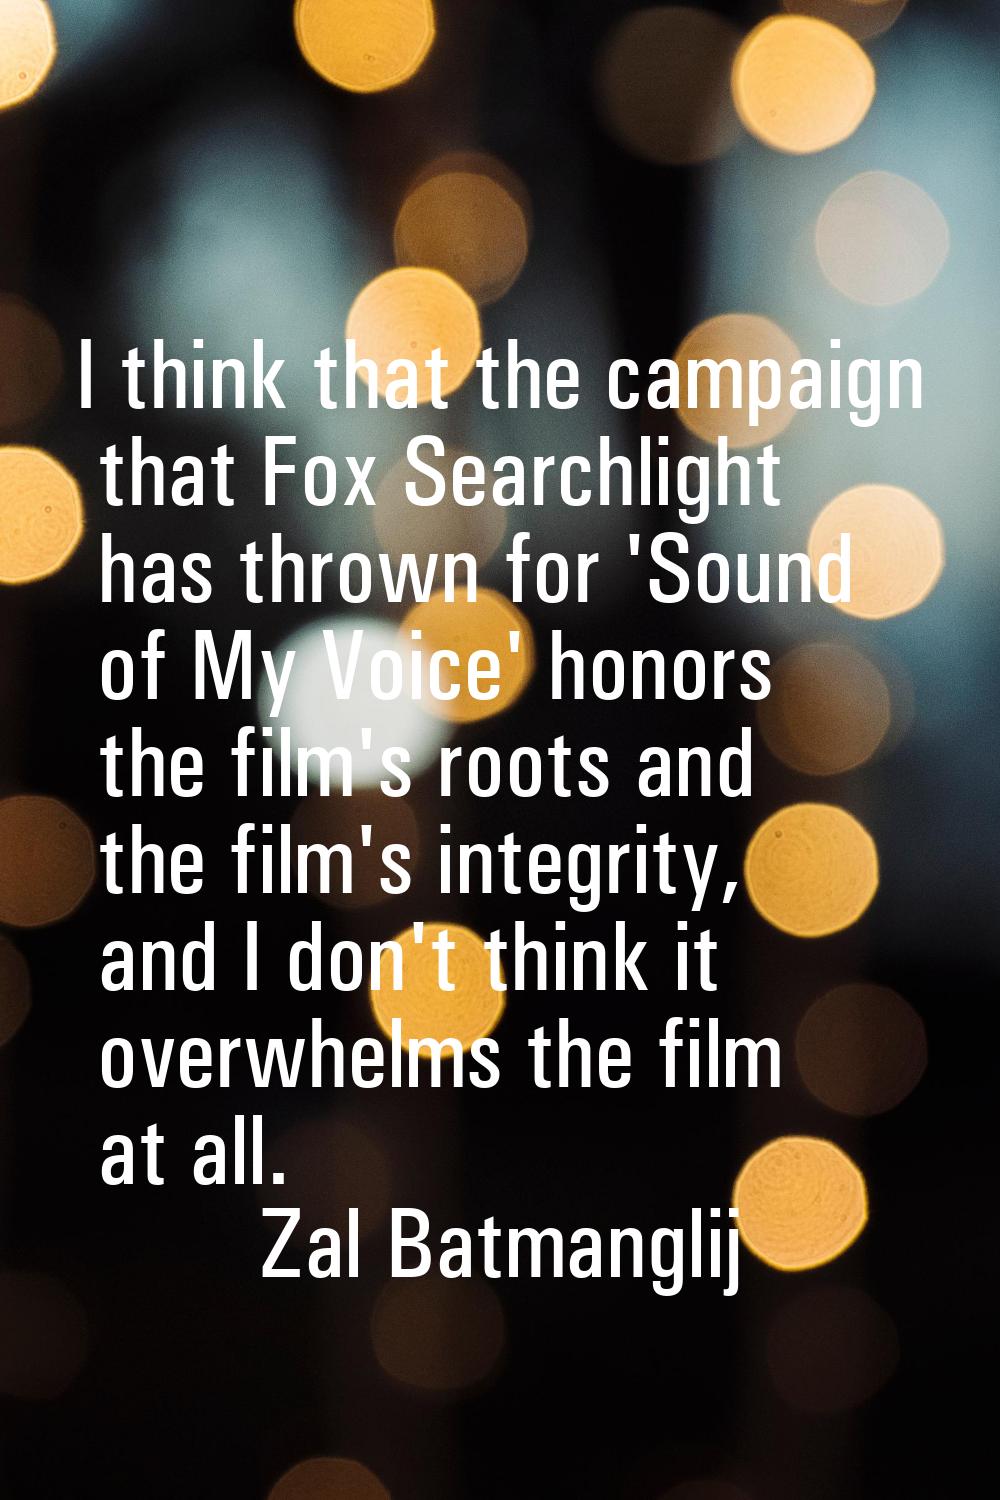 I think that the campaign that Fox Searchlight has thrown for 'Sound of My Voice' honors the film's